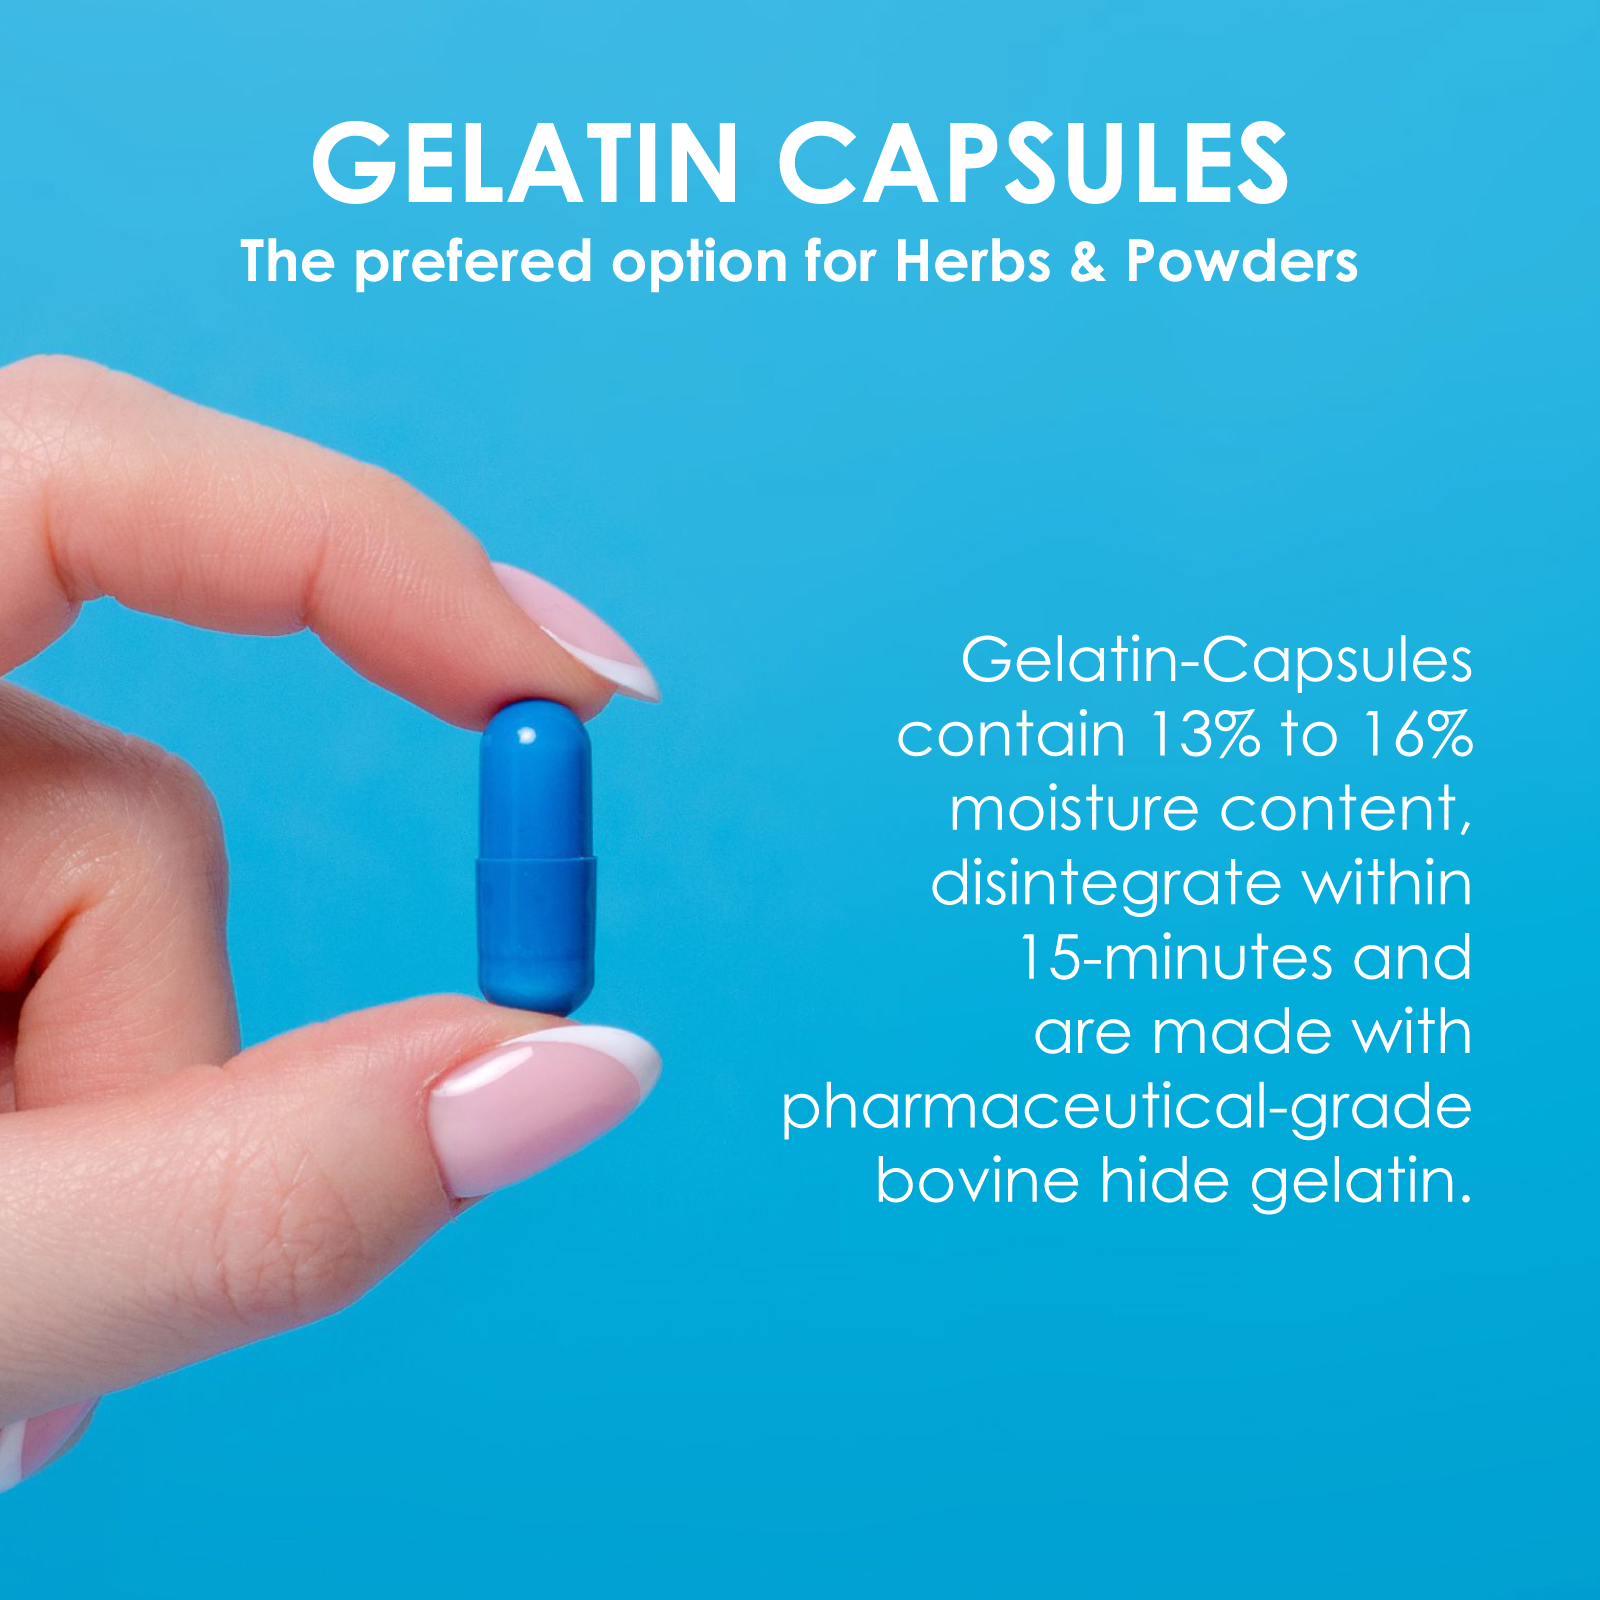 Clear Size 000 Empty Gelatin Capsules by Capsuline - 100 Count - Gelatin Capsules